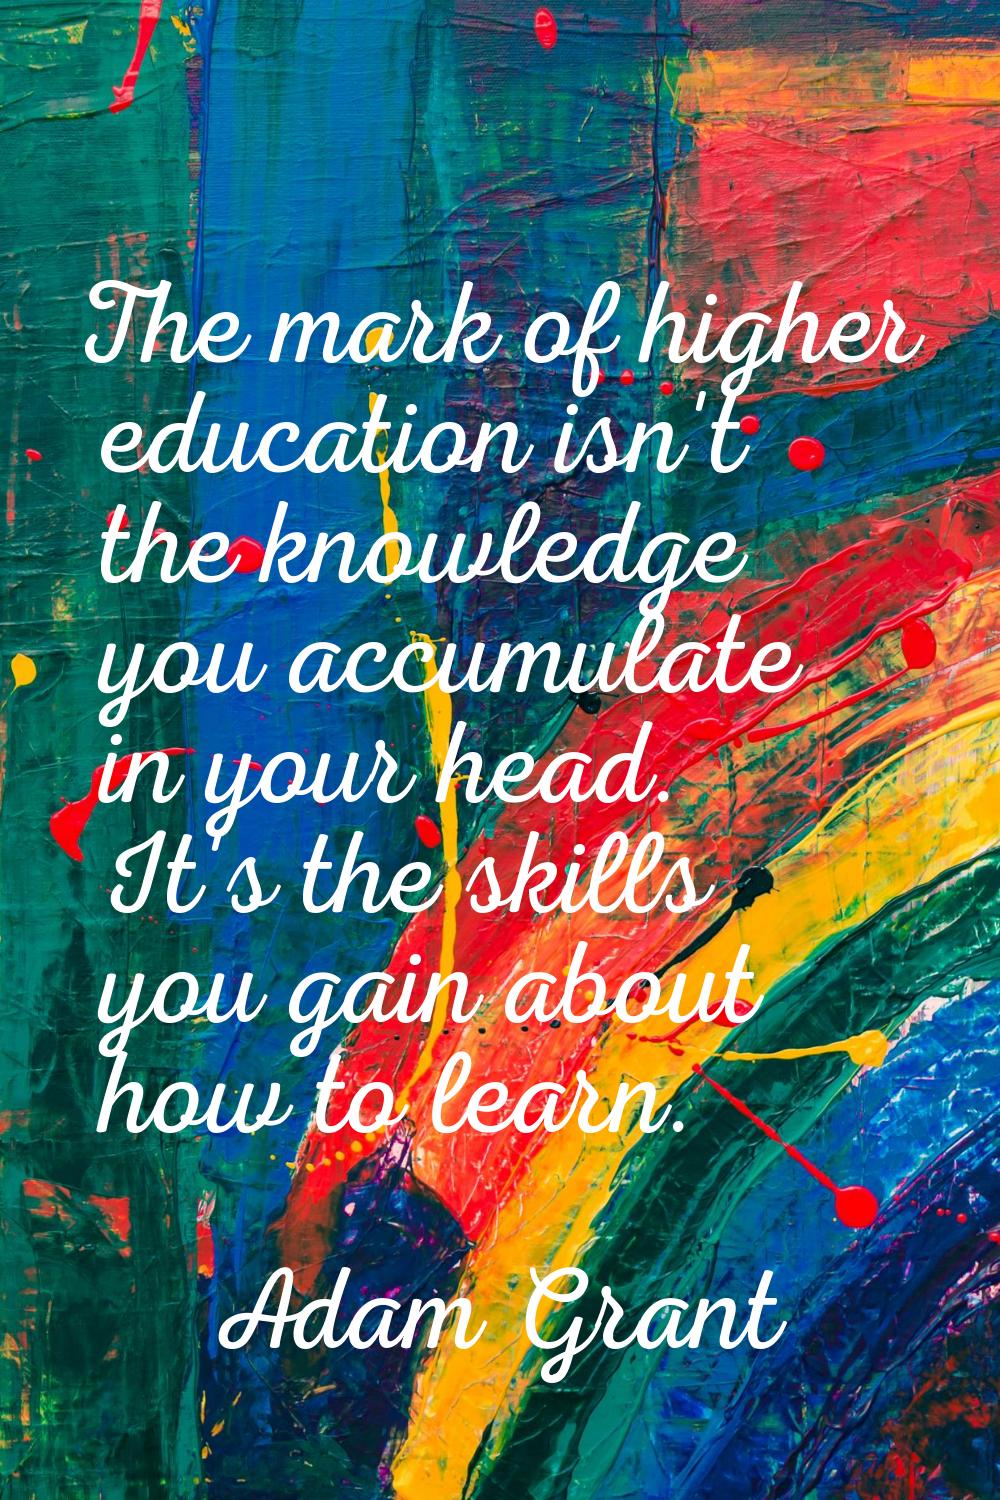 The mark of higher education isn't the knowledge you accumulate in your head. It's the skills you g